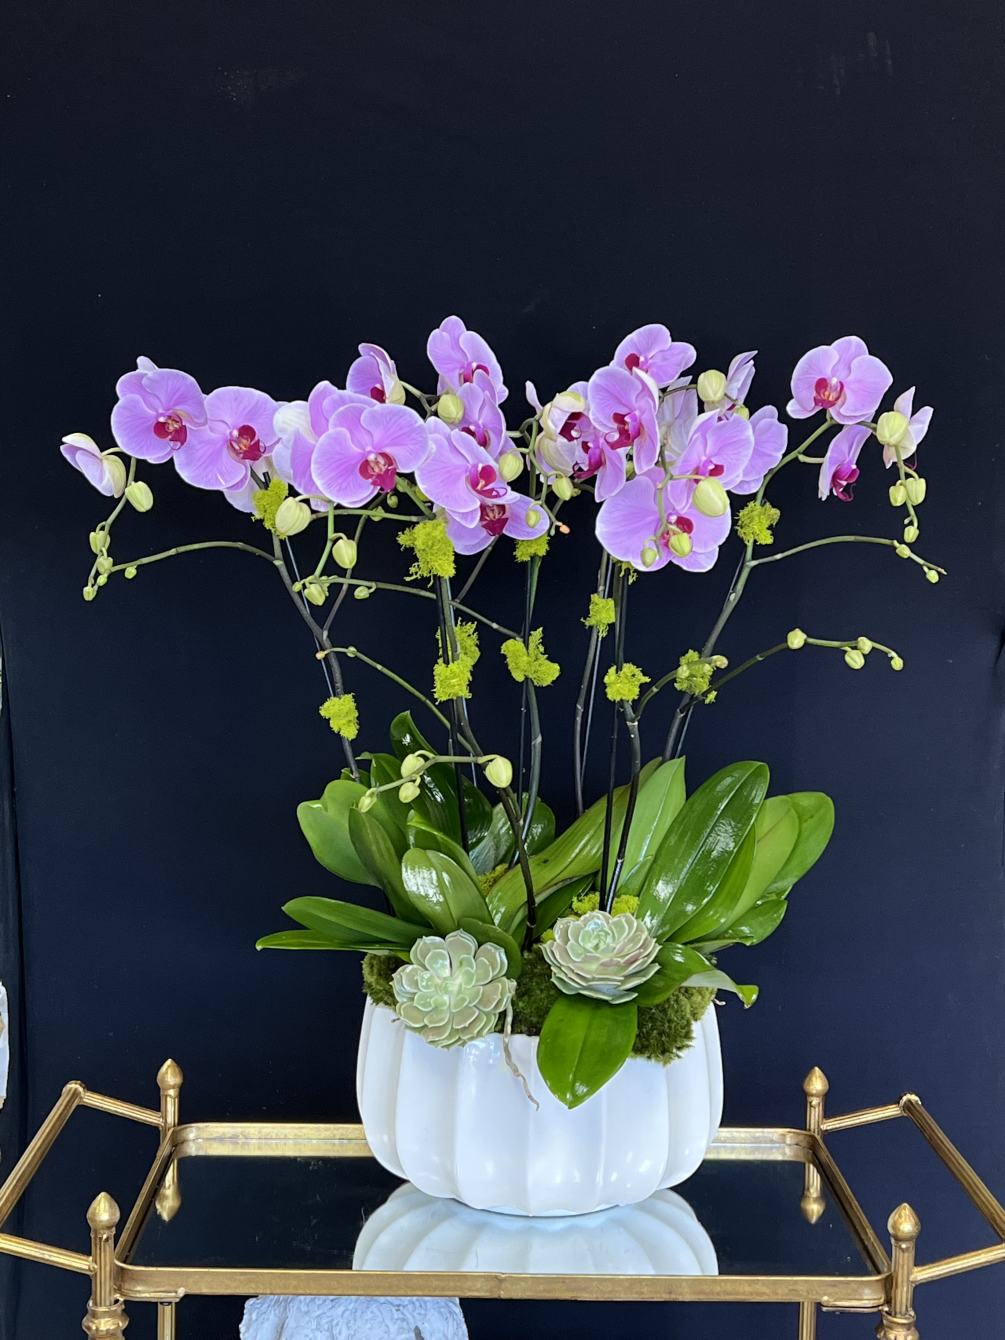 A simple orchid arrangement for any occassion!